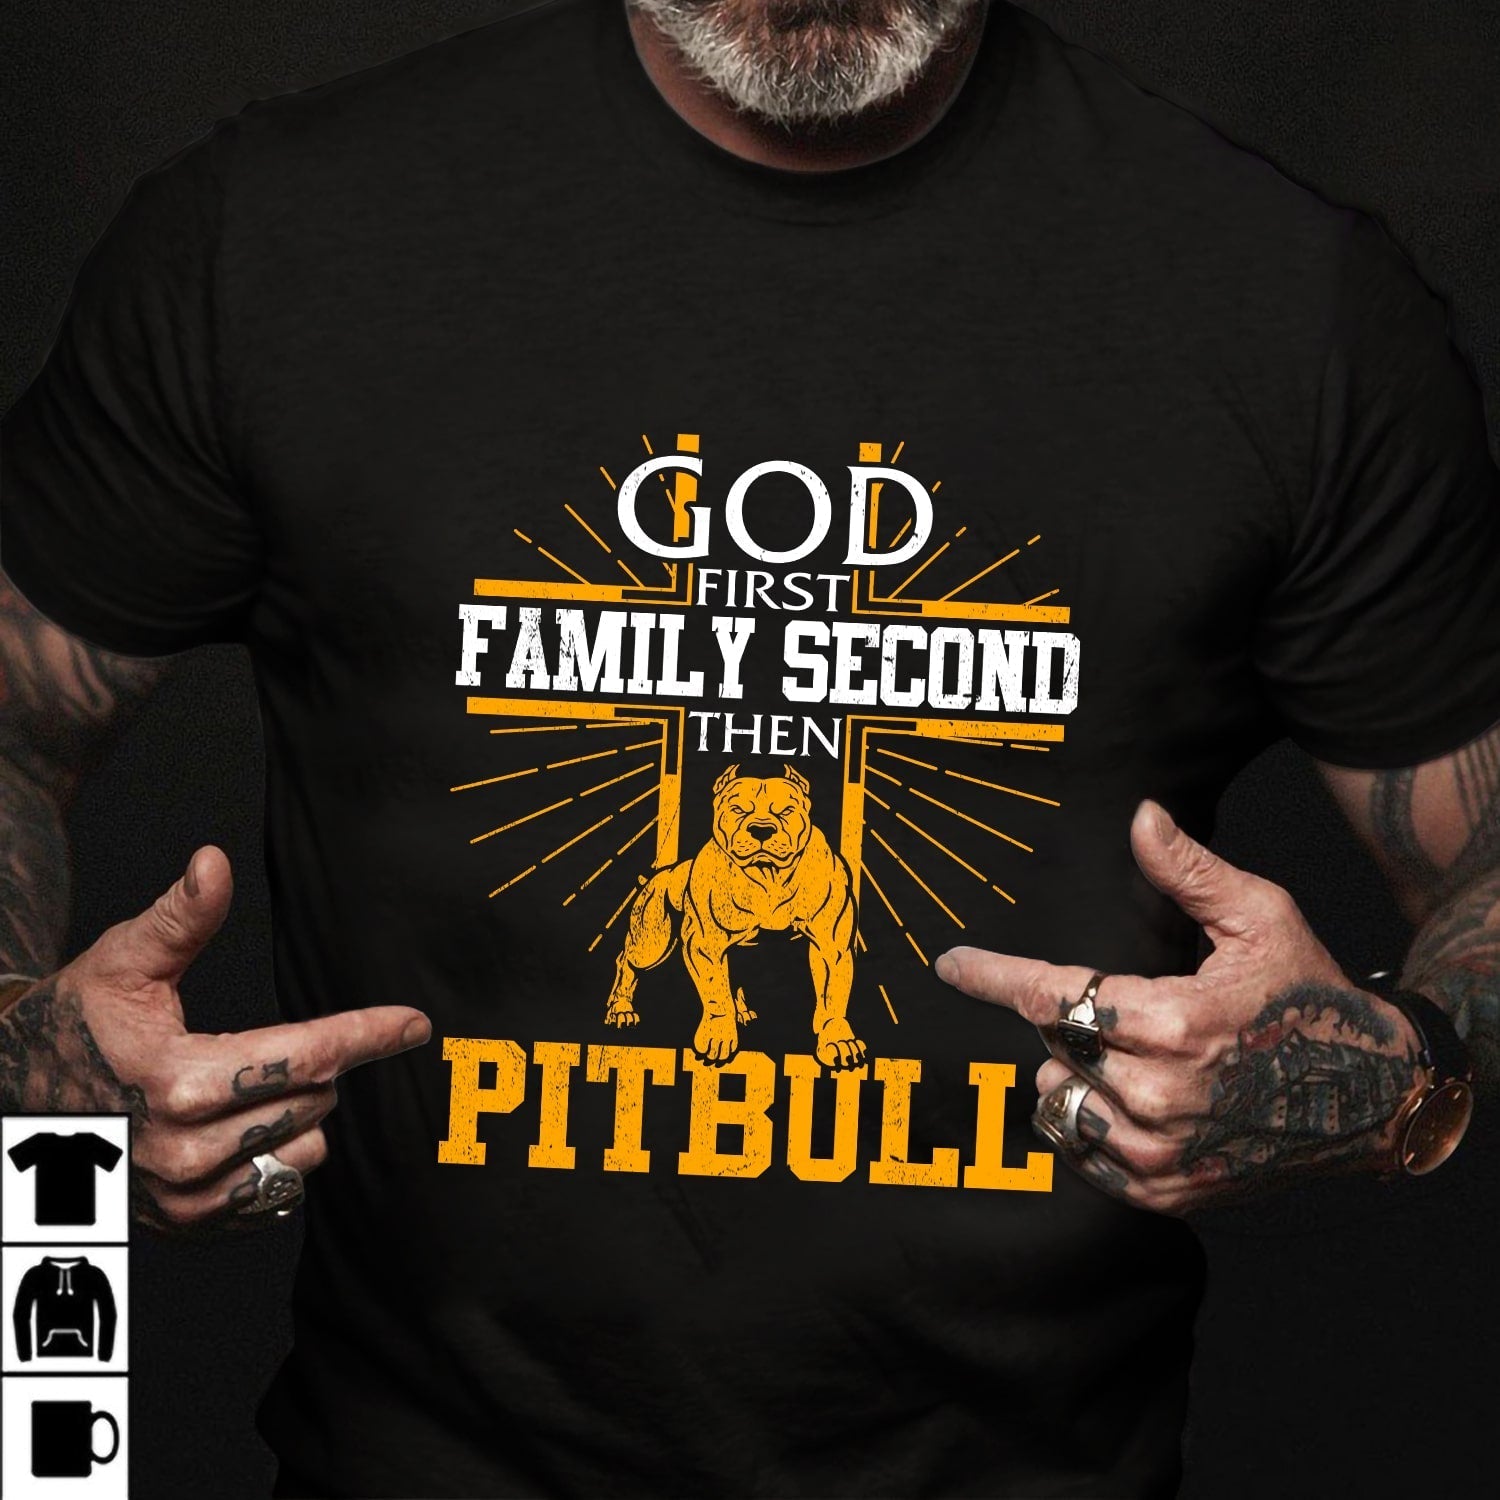 Pit Bull – God first Family second then Pit Bull – T Shirt